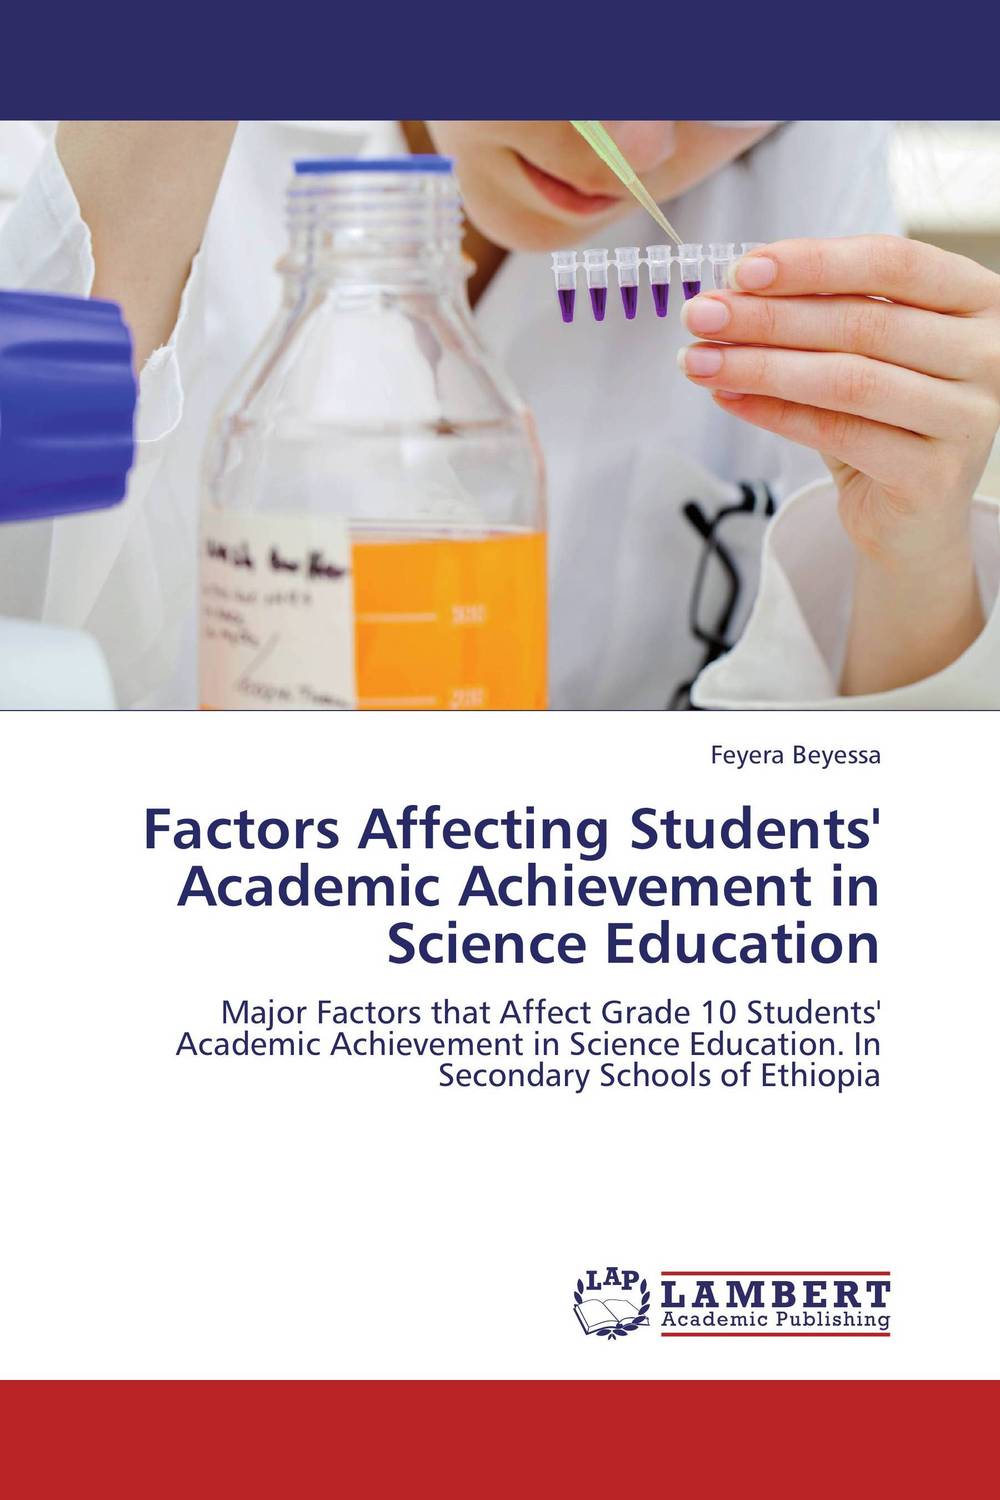 Factors Affecting Students' Academic Achievement in Science Education